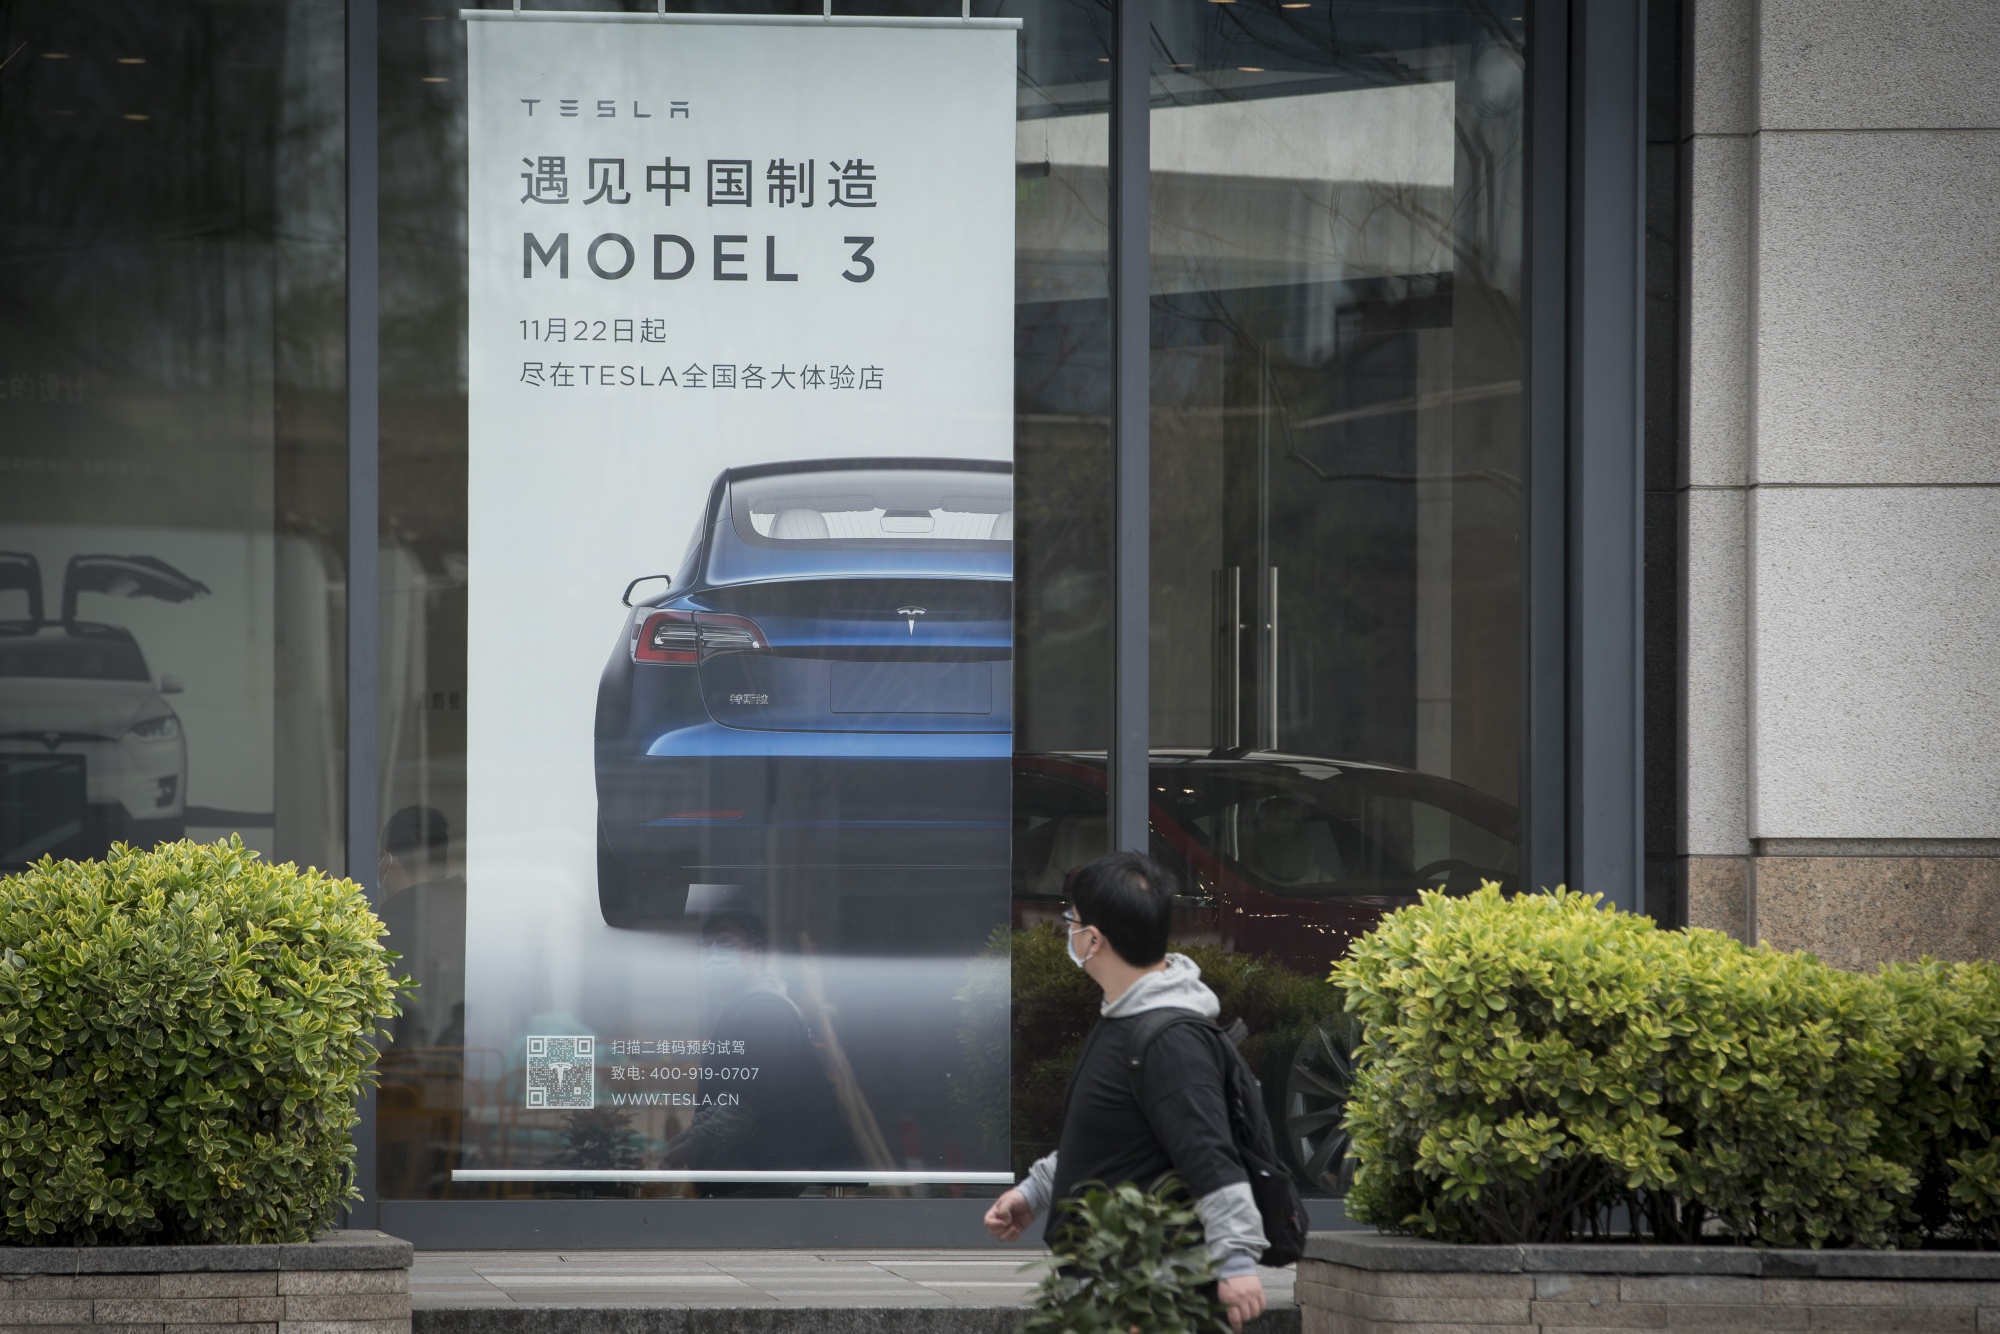 An advertisement for the Tesla Model 3 is displayed at a dealership in Shanghai.